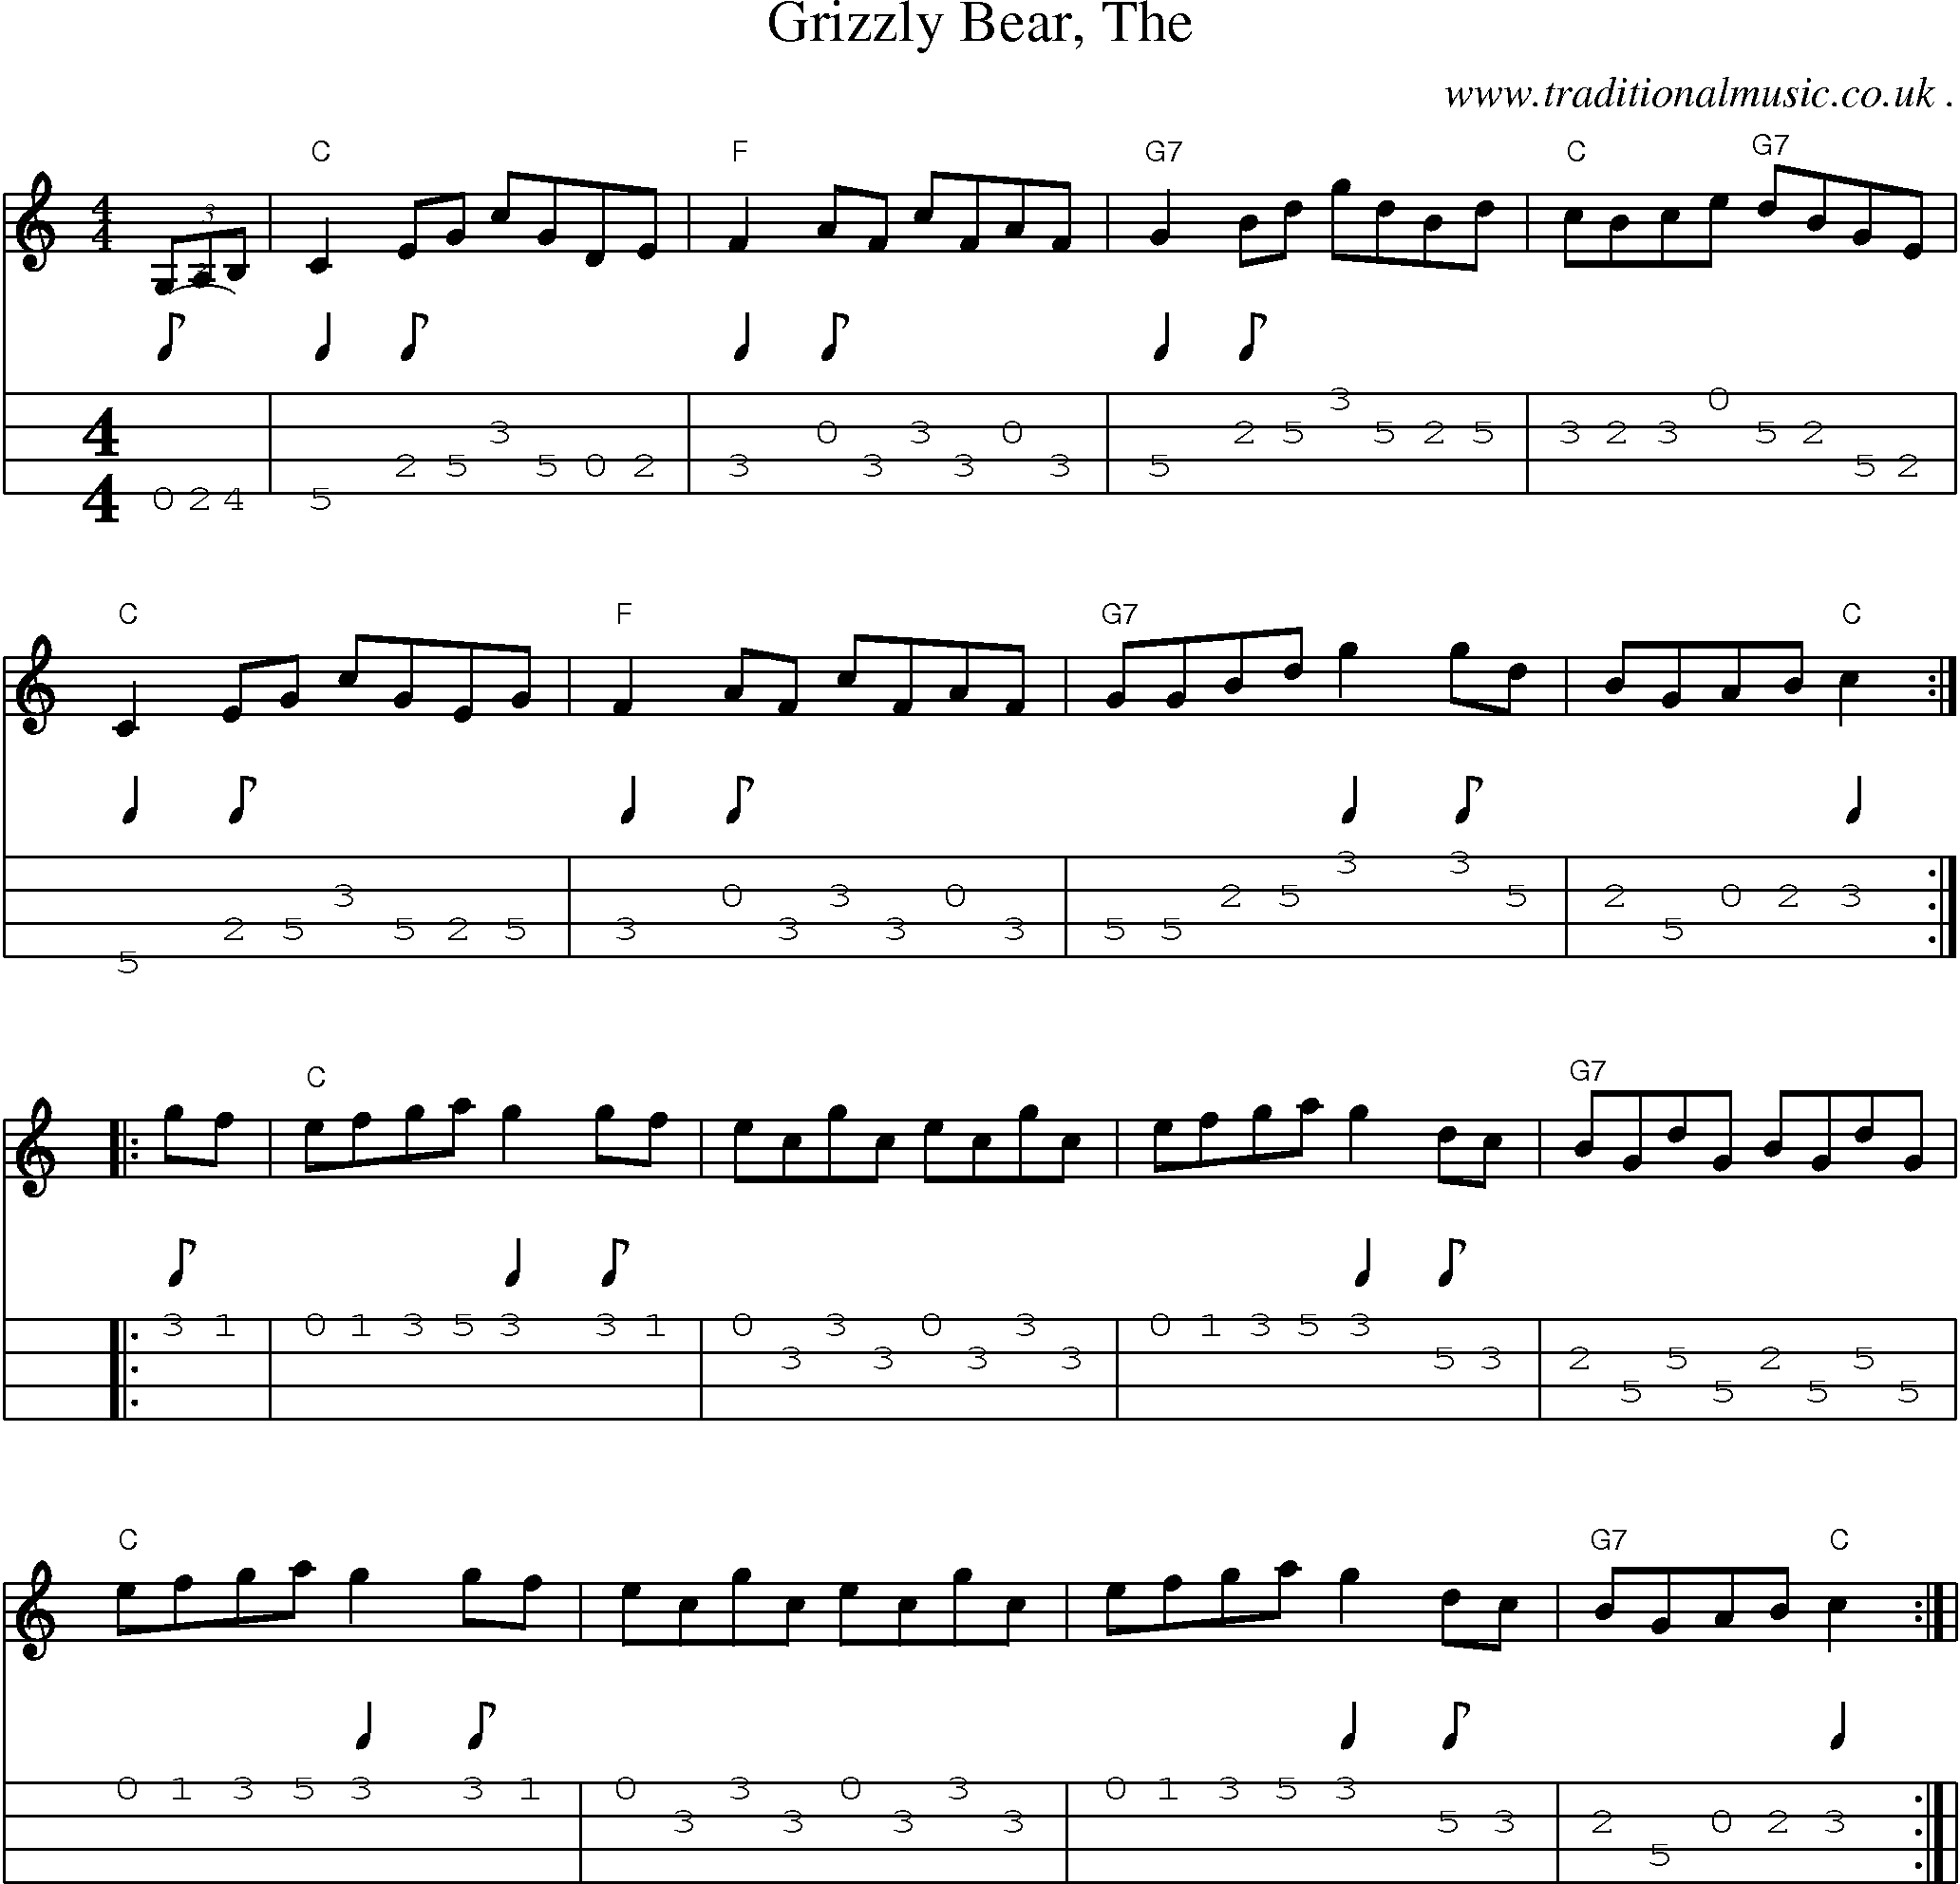 Music Score and Mandolin Tabs for Grizzly Bear The